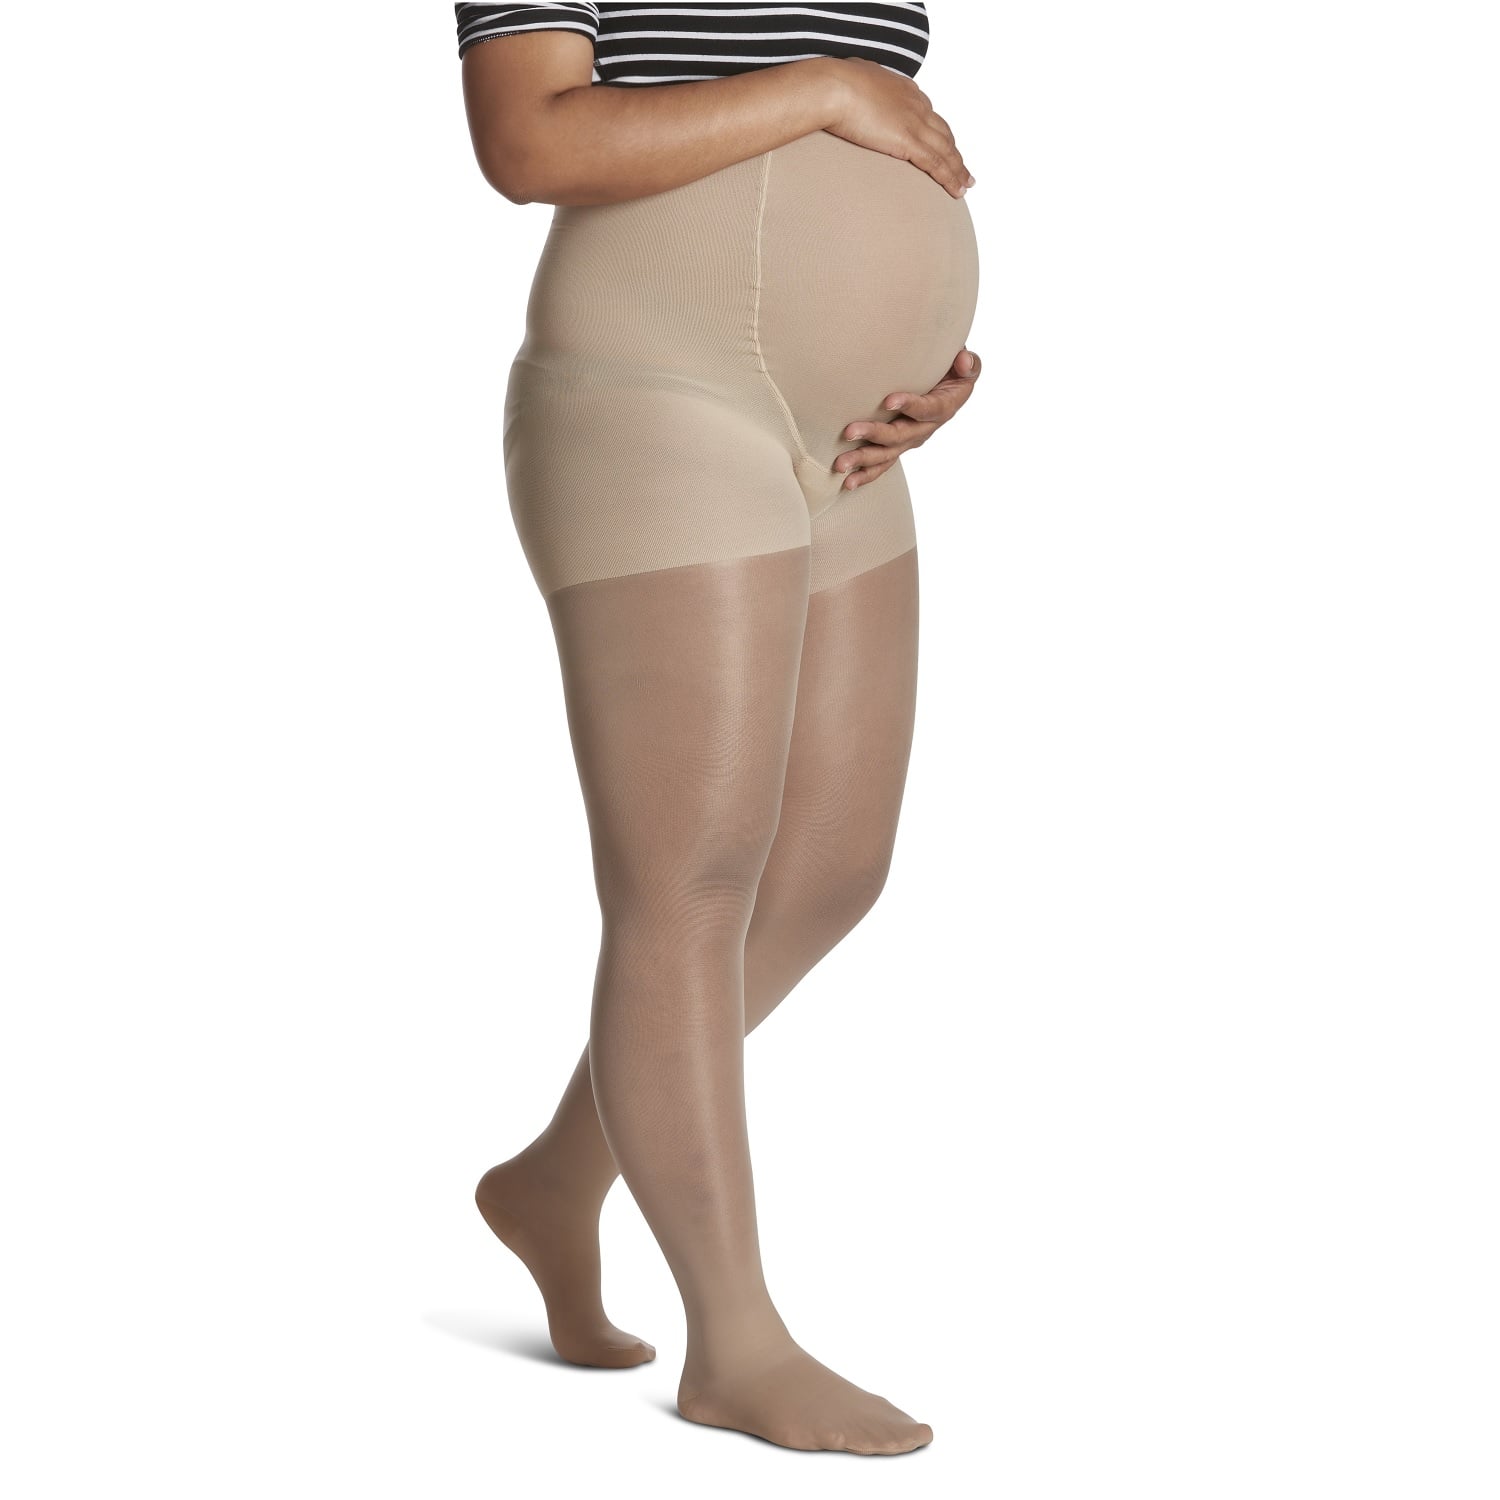 Absolute Support Sheer Compression Maternity Pantyhose - Medium Compression  15-20mmHg - A811